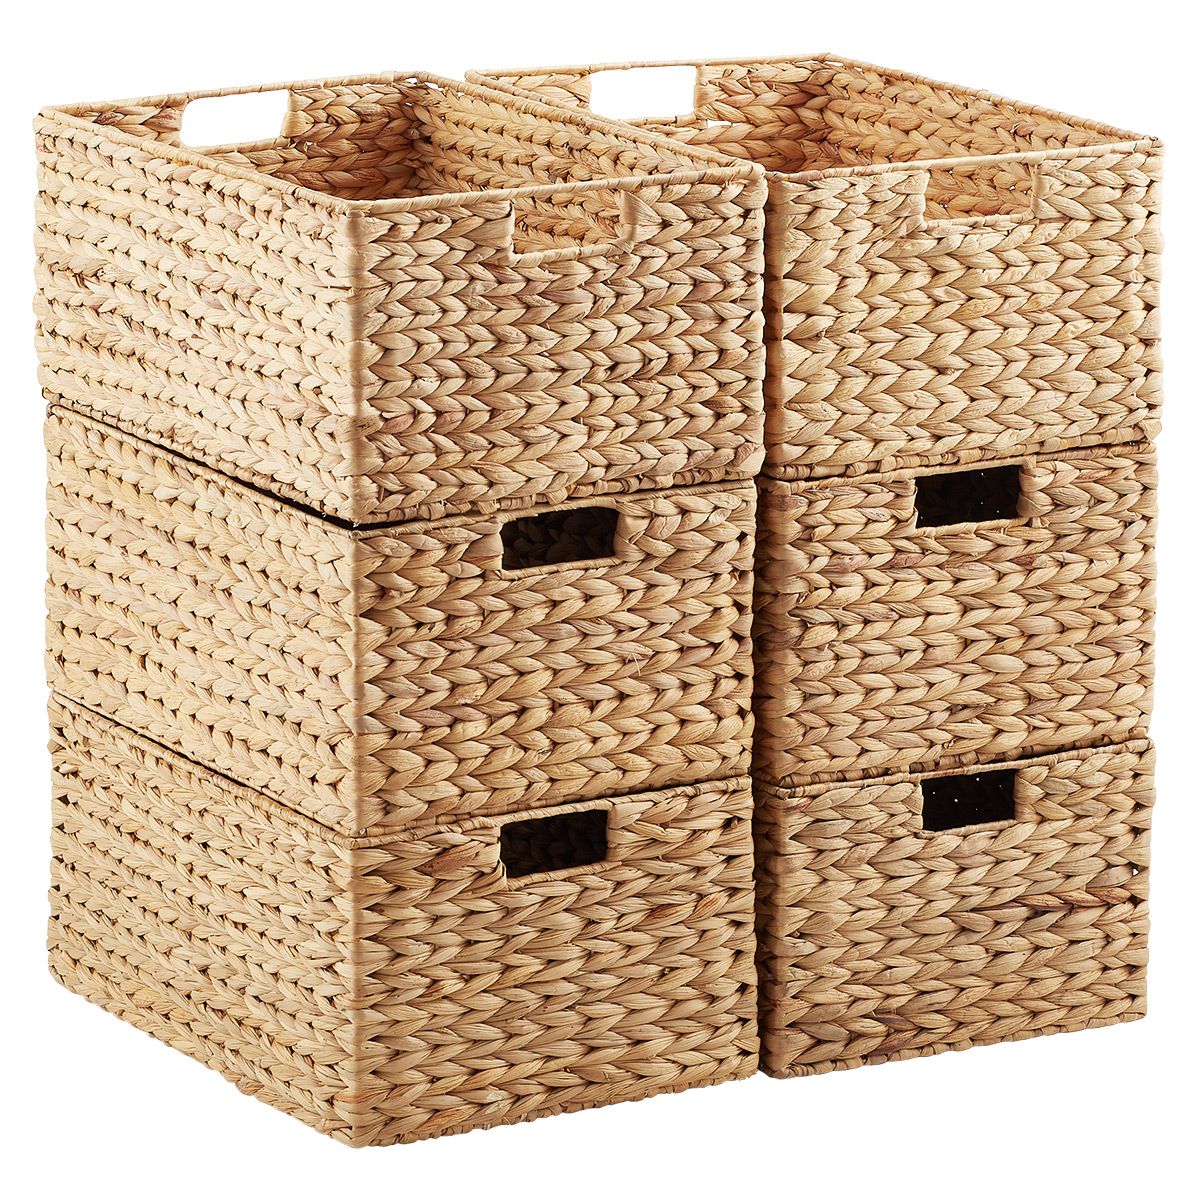 Case of 6 Large Water Hyacinth Bin Natural | The Container Store